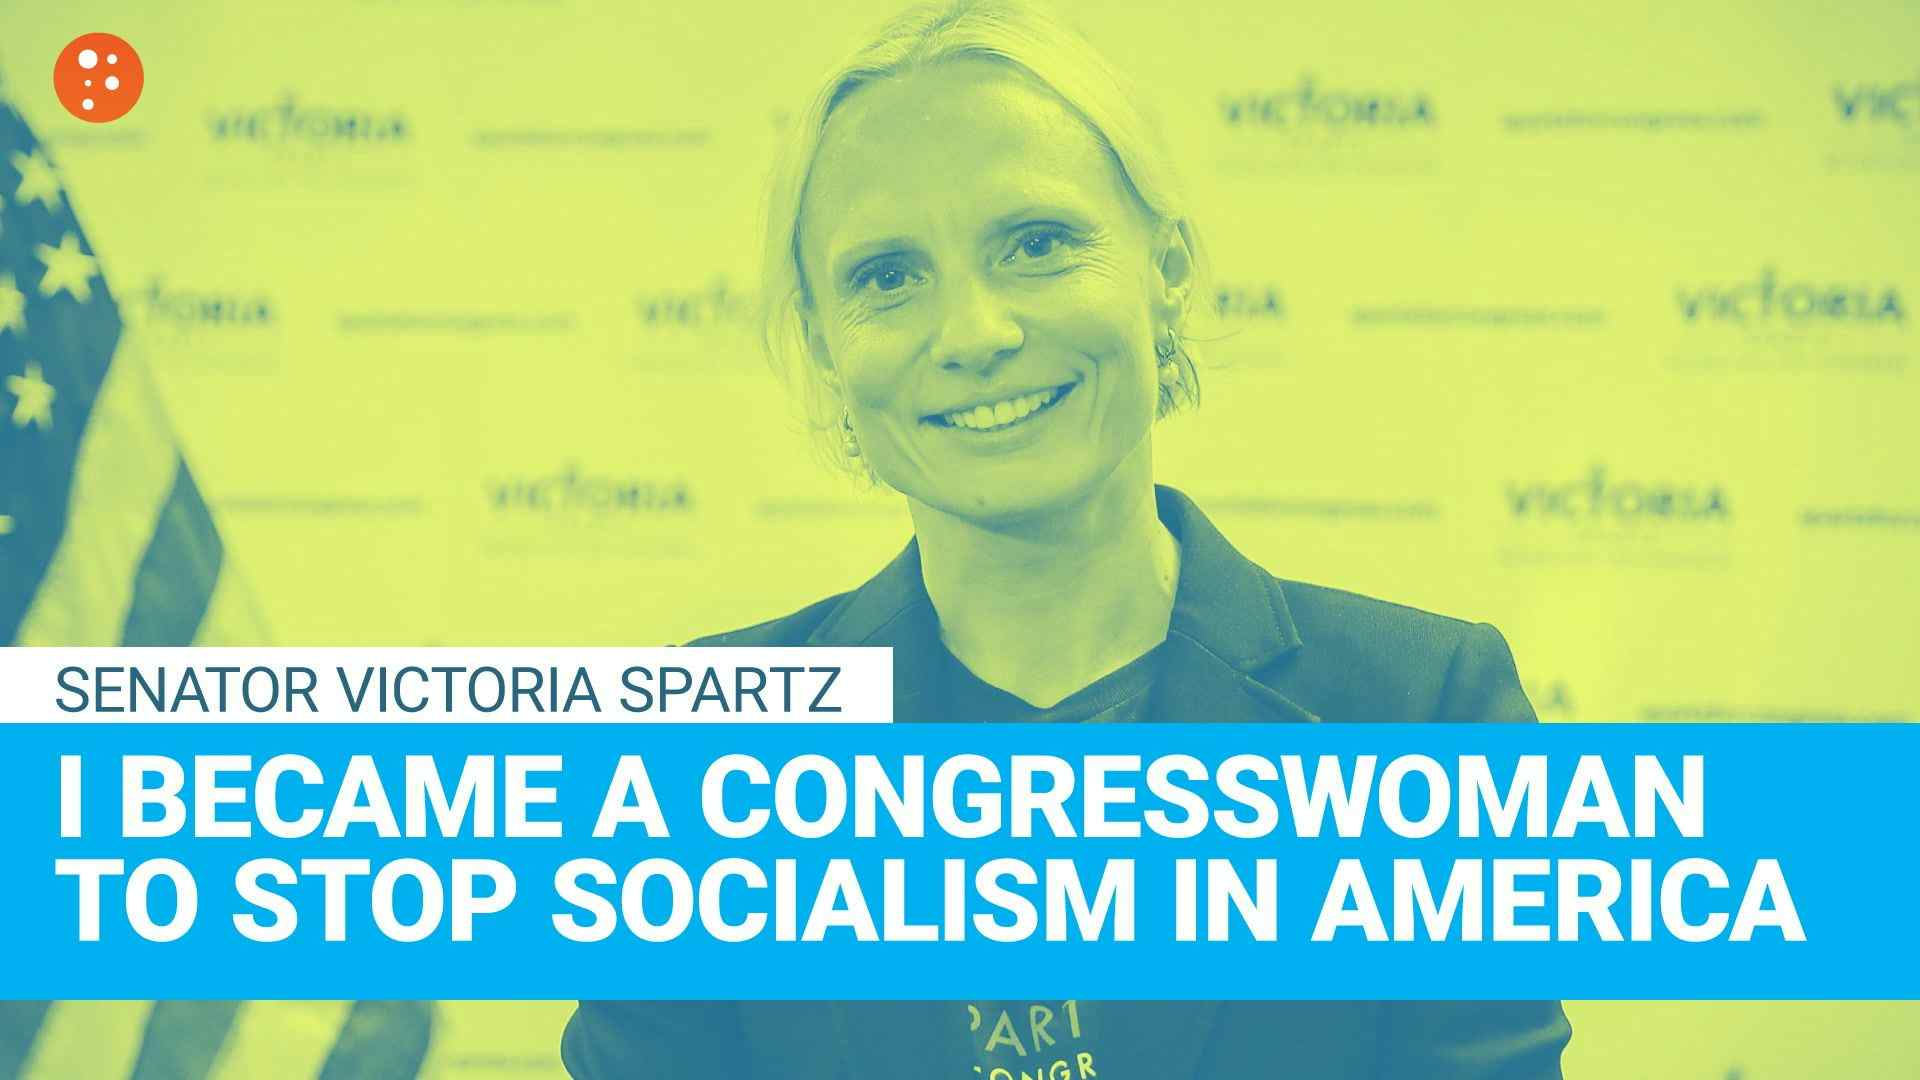 I Became a Congresswoman to Stop Socialism in America